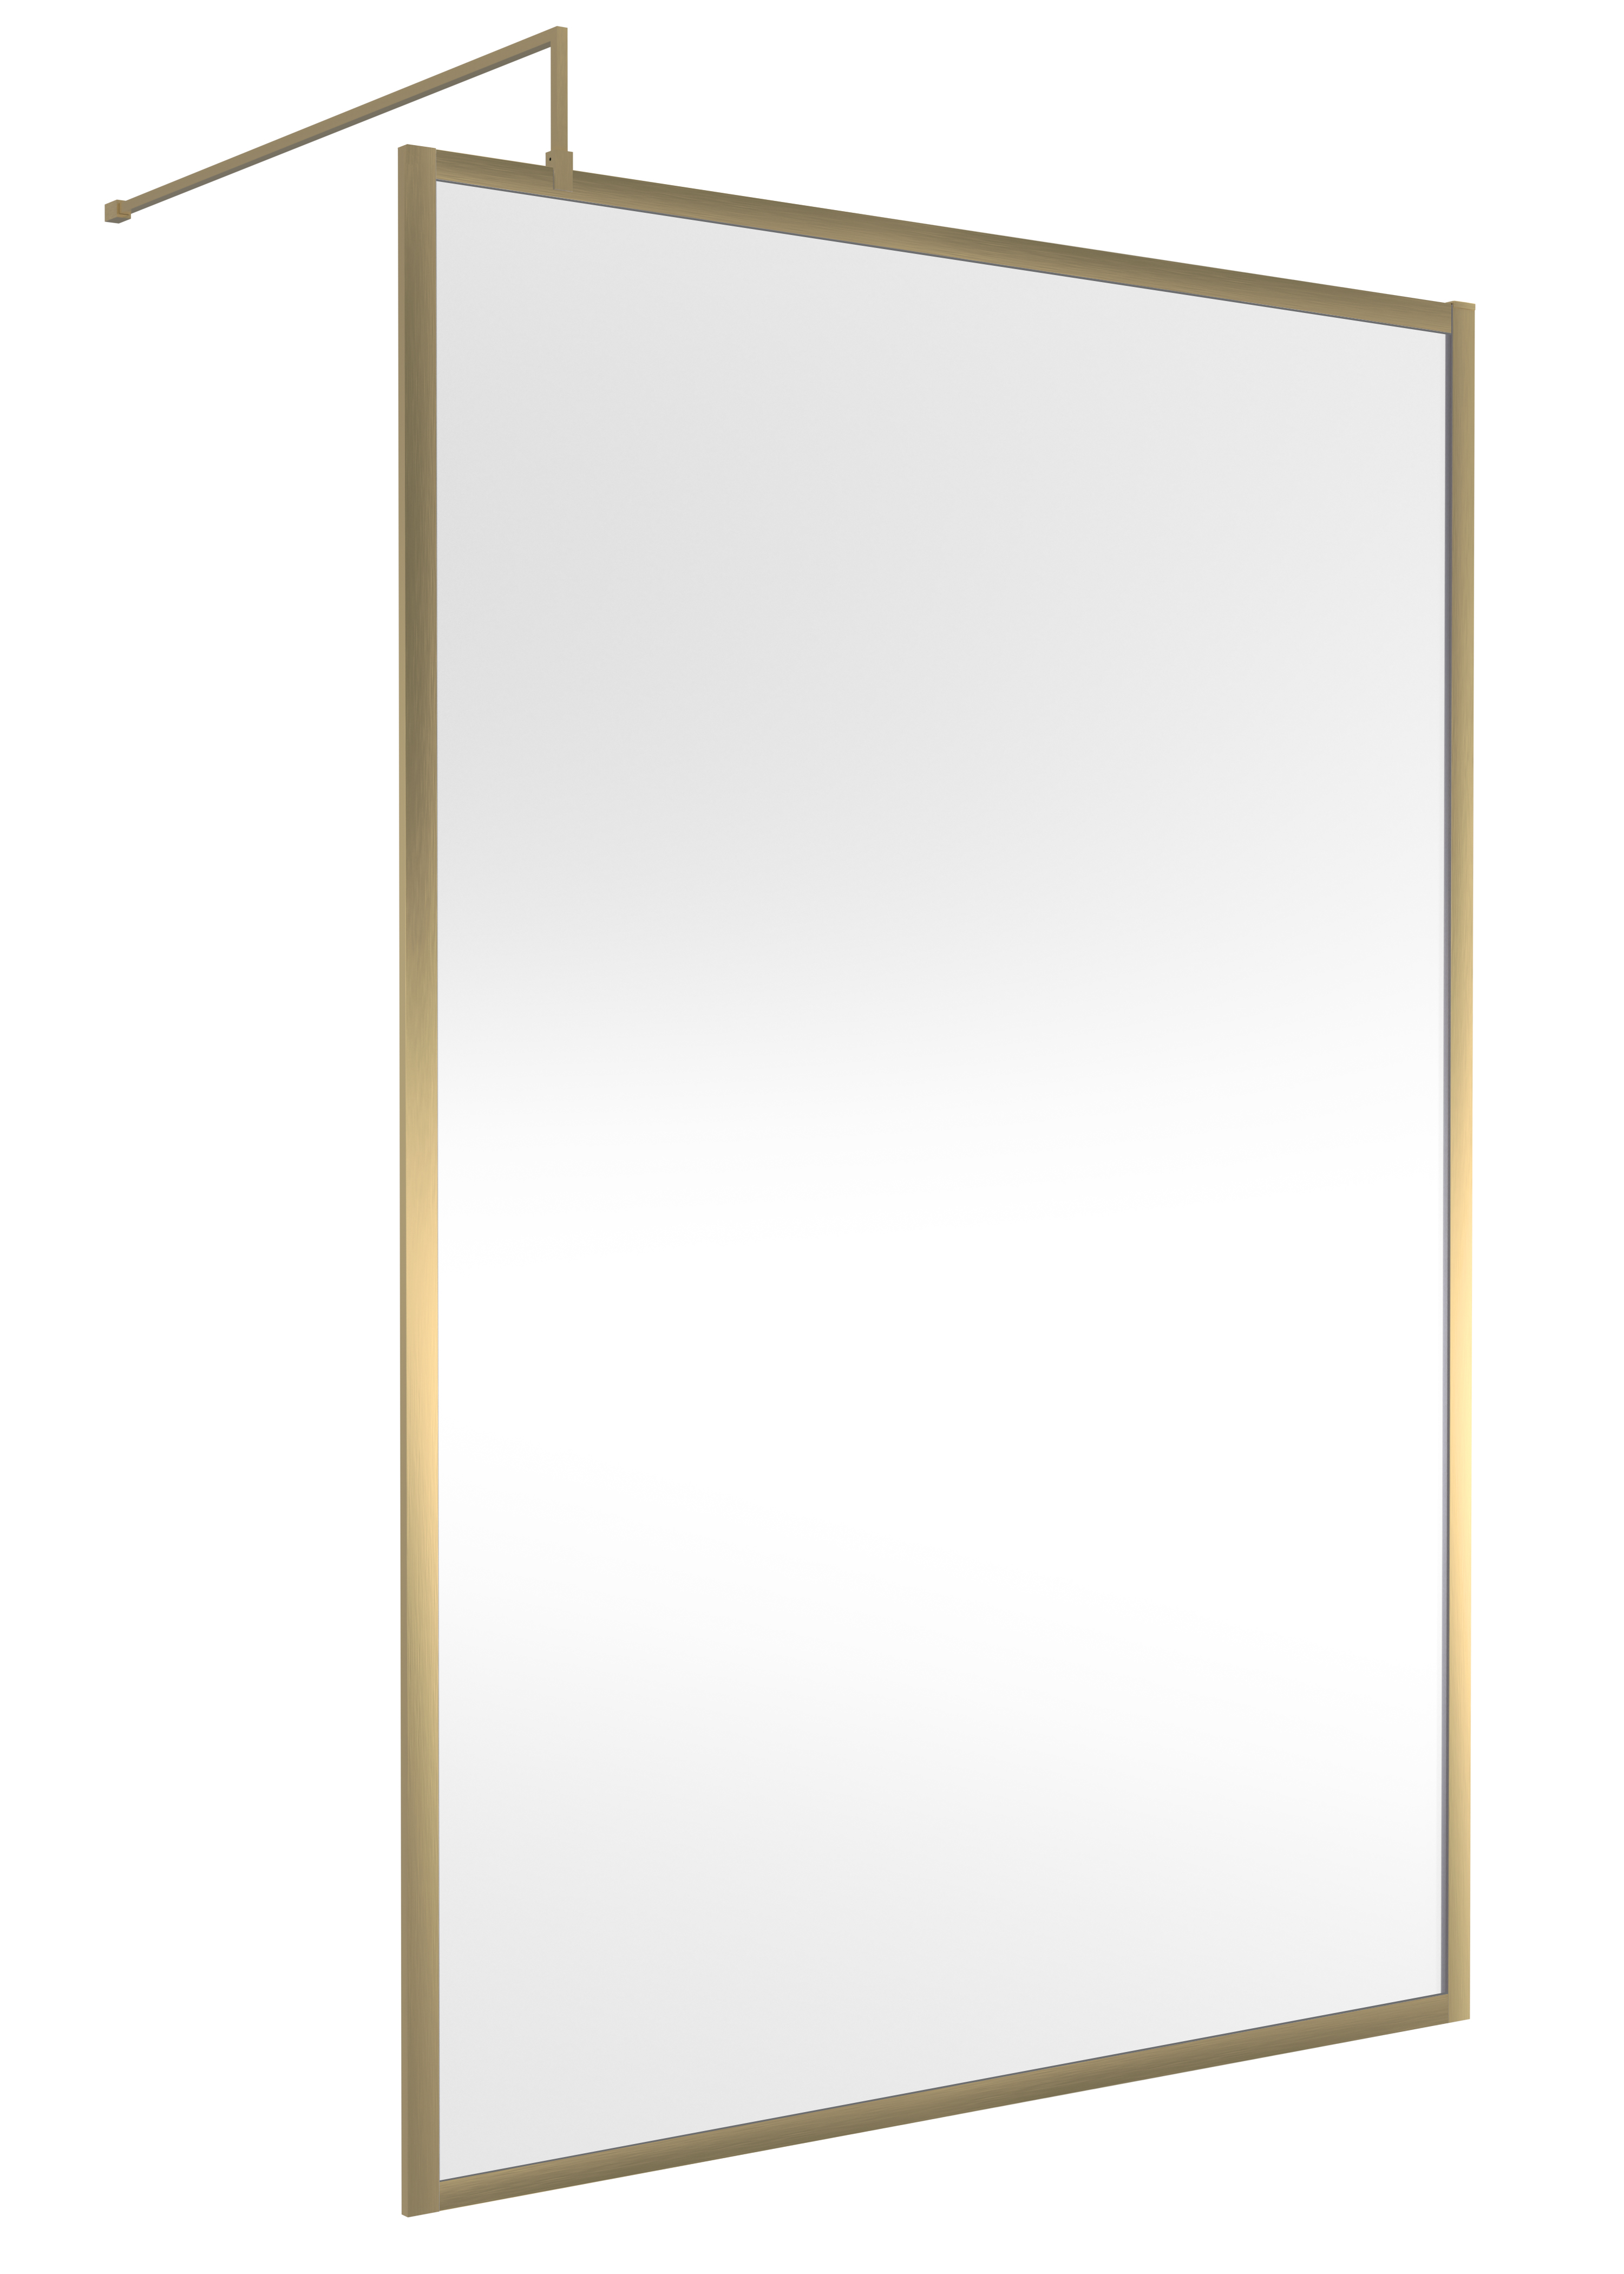 Hudson Reed Full Outer Frame Wetroom Screen 1950x1400x8mm - Brushed Brass (18901)